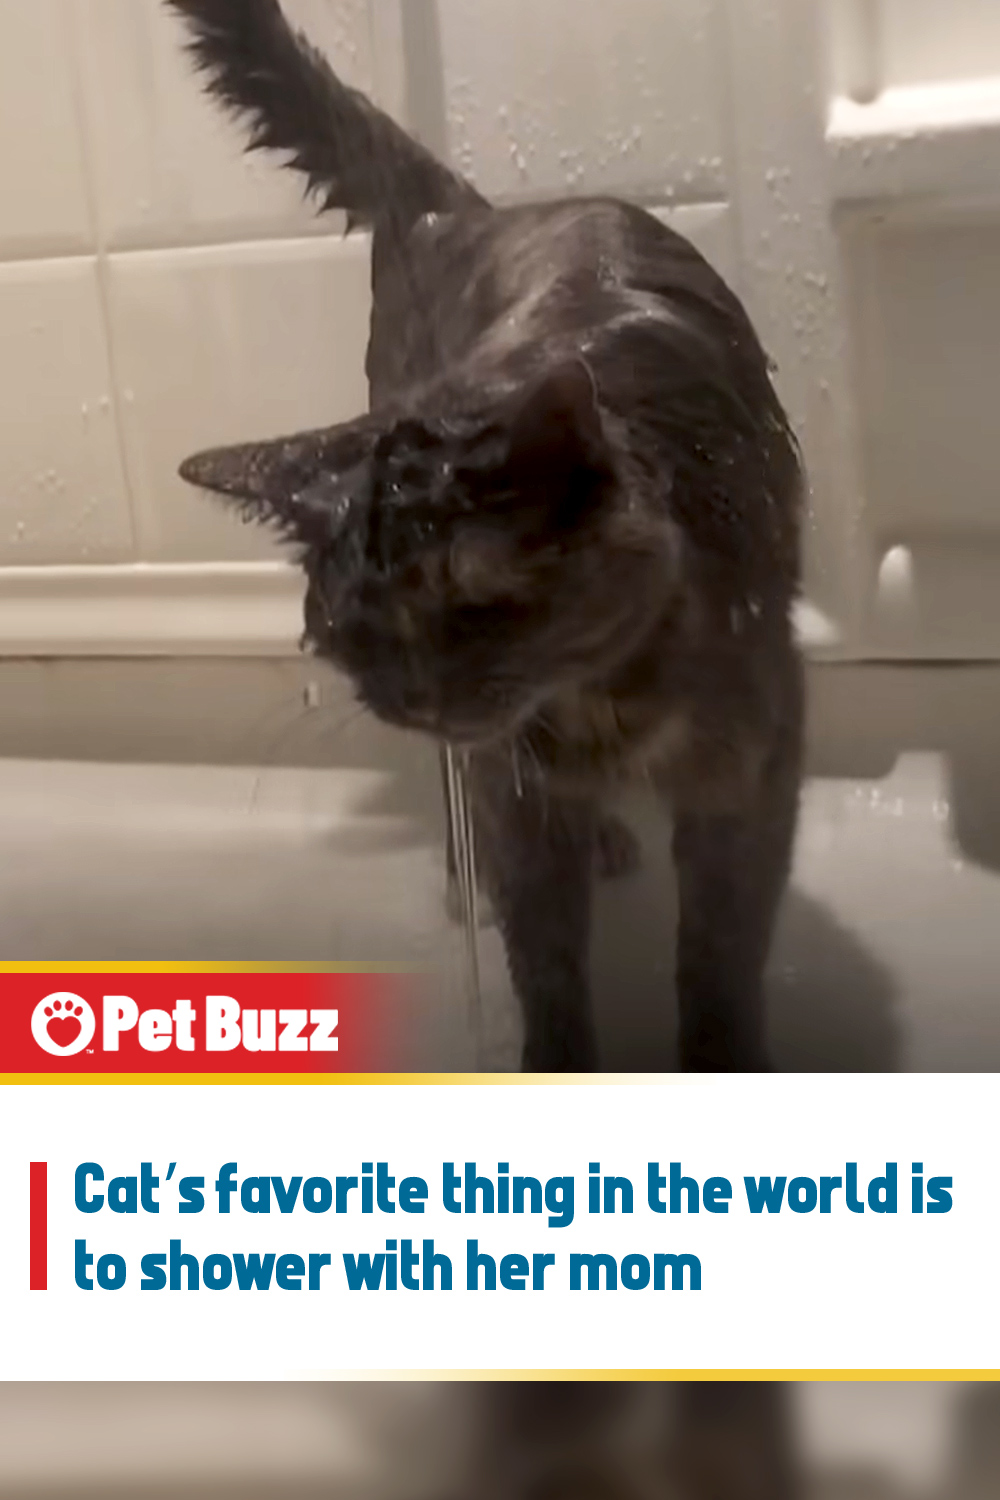 Cat’s favorite thing in the world is to shower with her mom